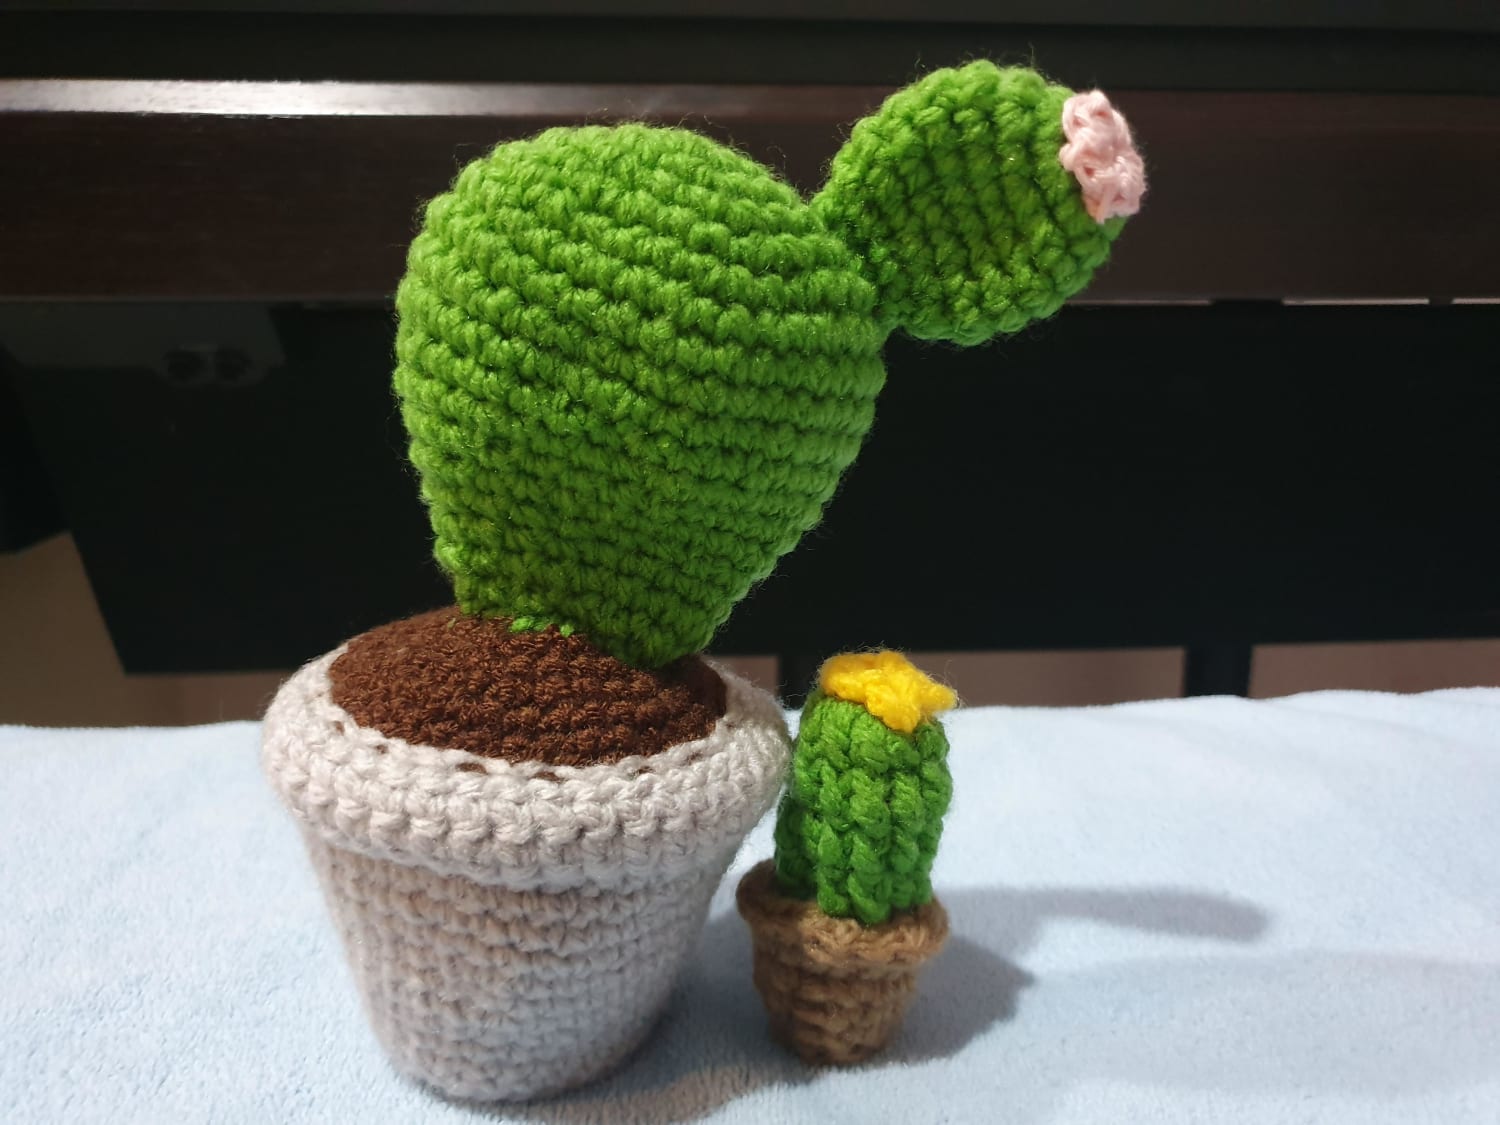 Made these cacti with no thorns